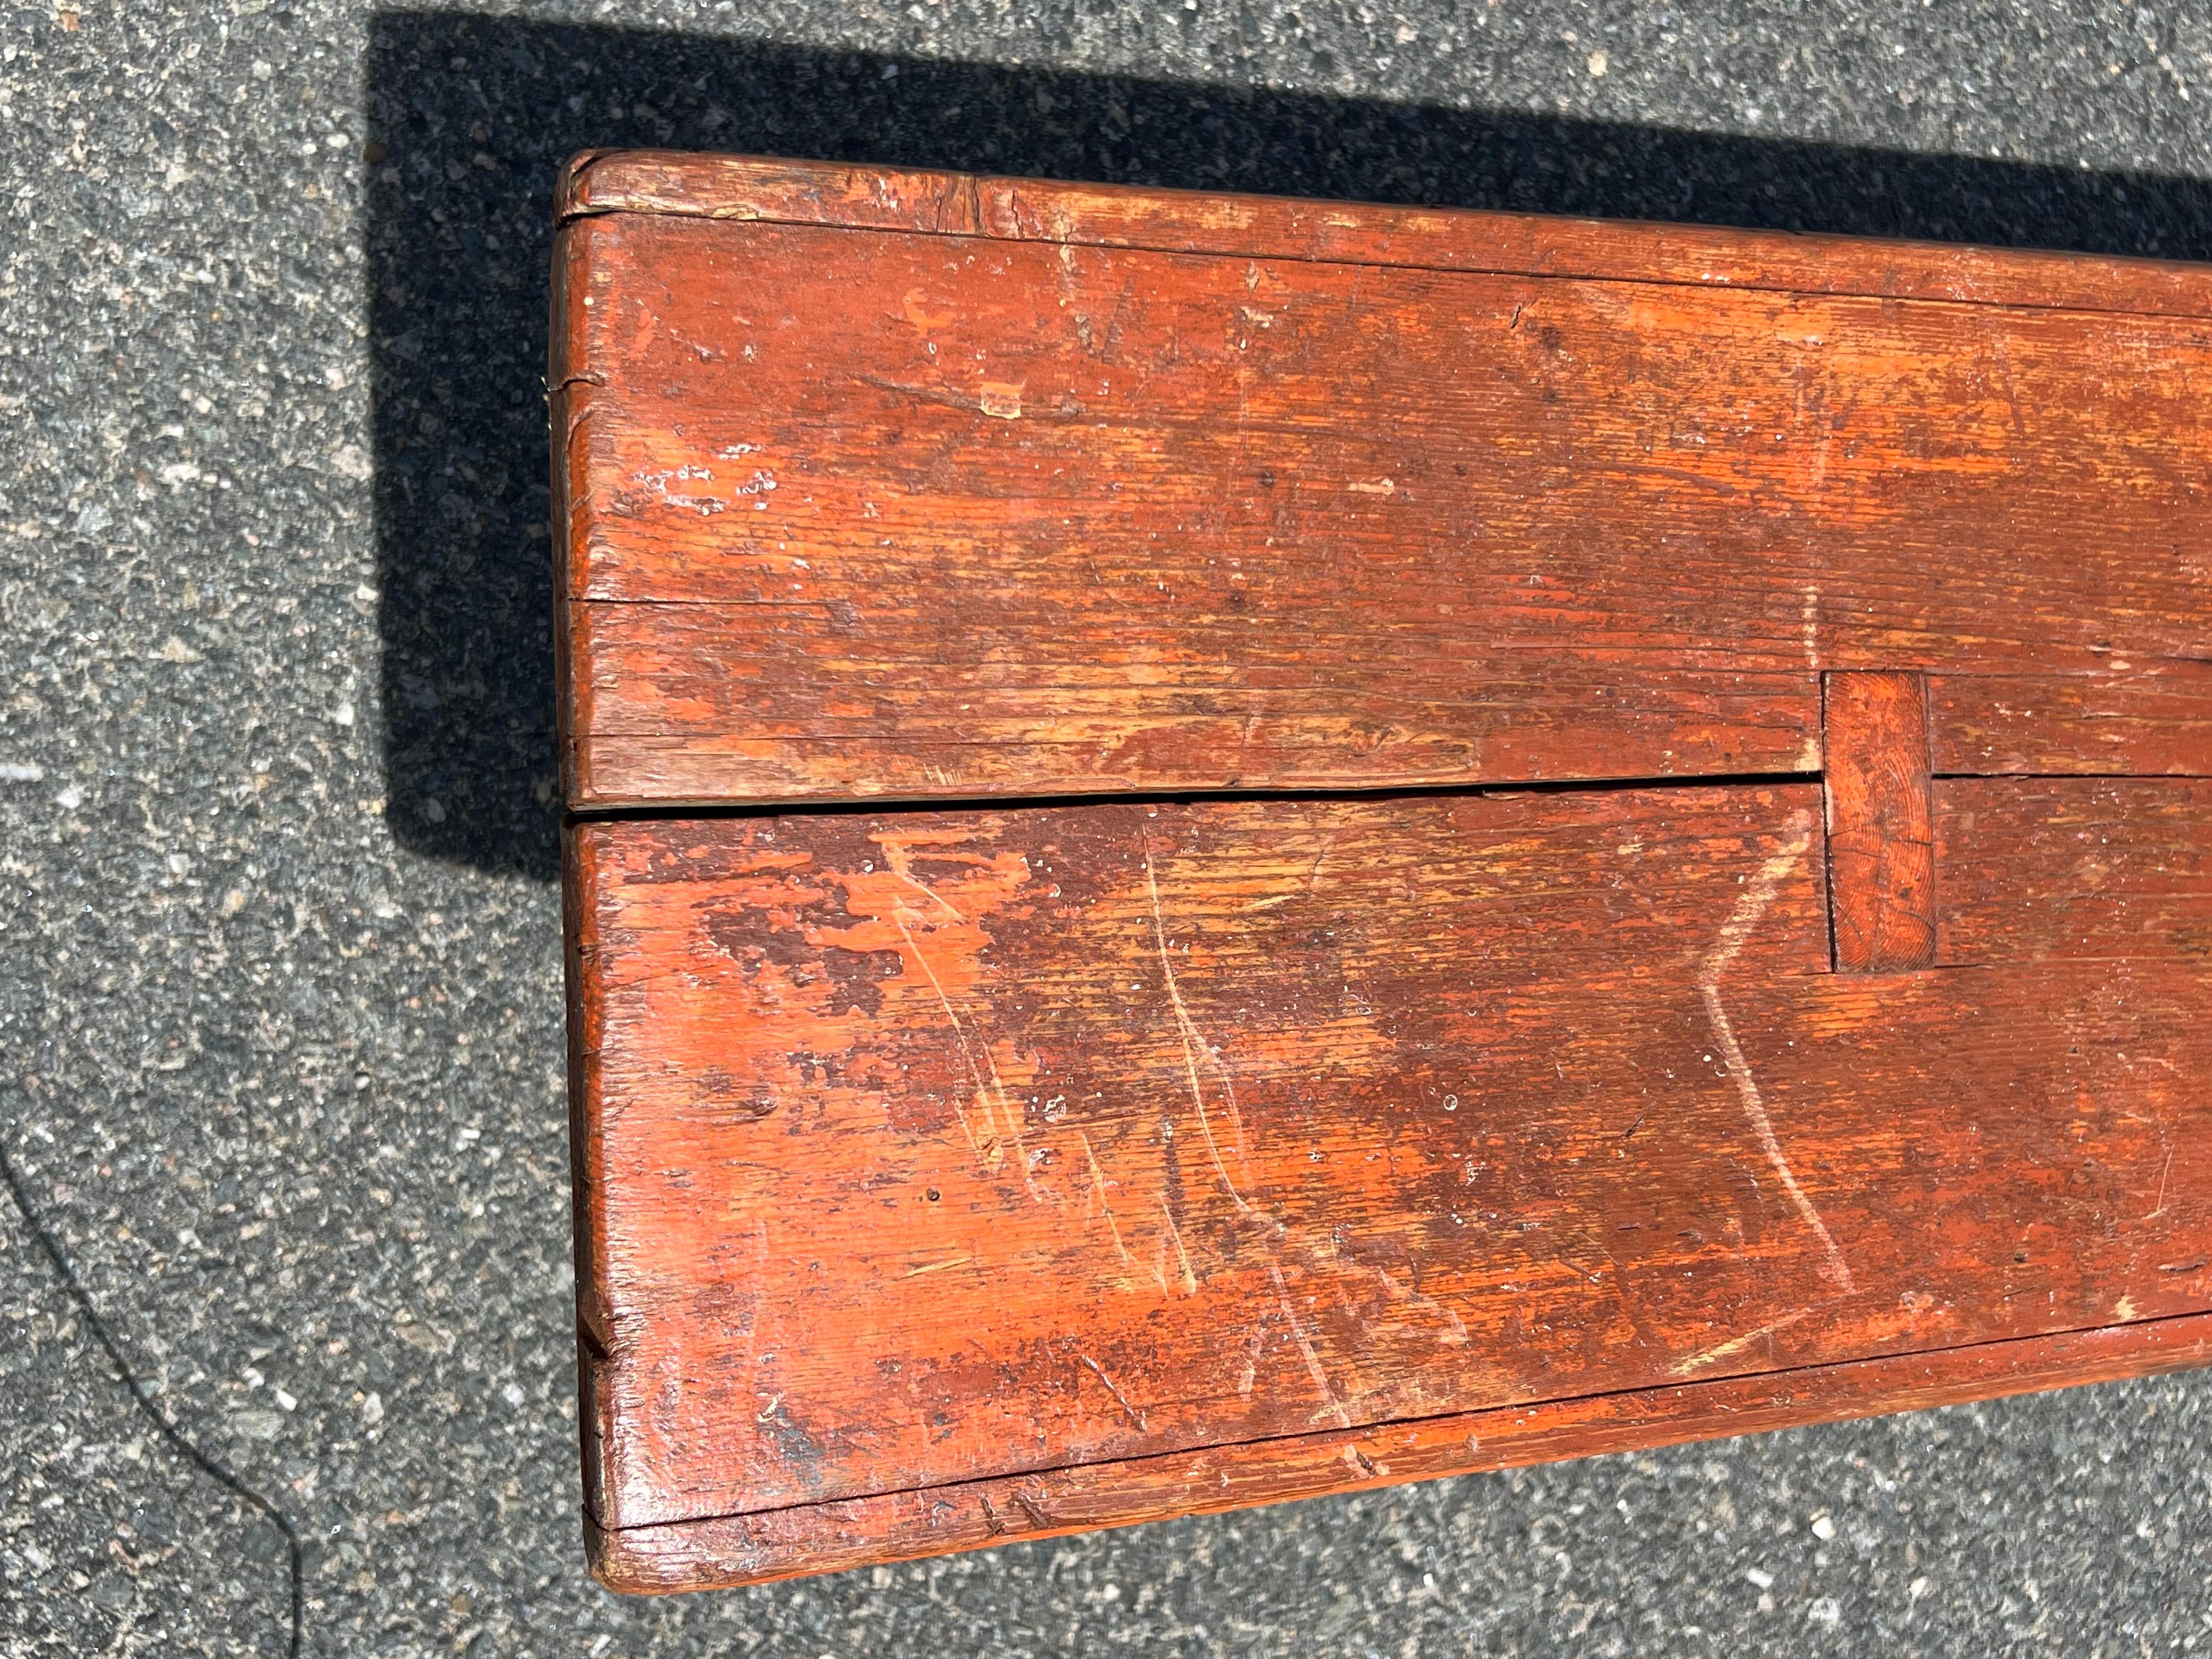 19th Century Long Pine Bench in Orange Paint In Good Condition For Sale In Nantucket, MA